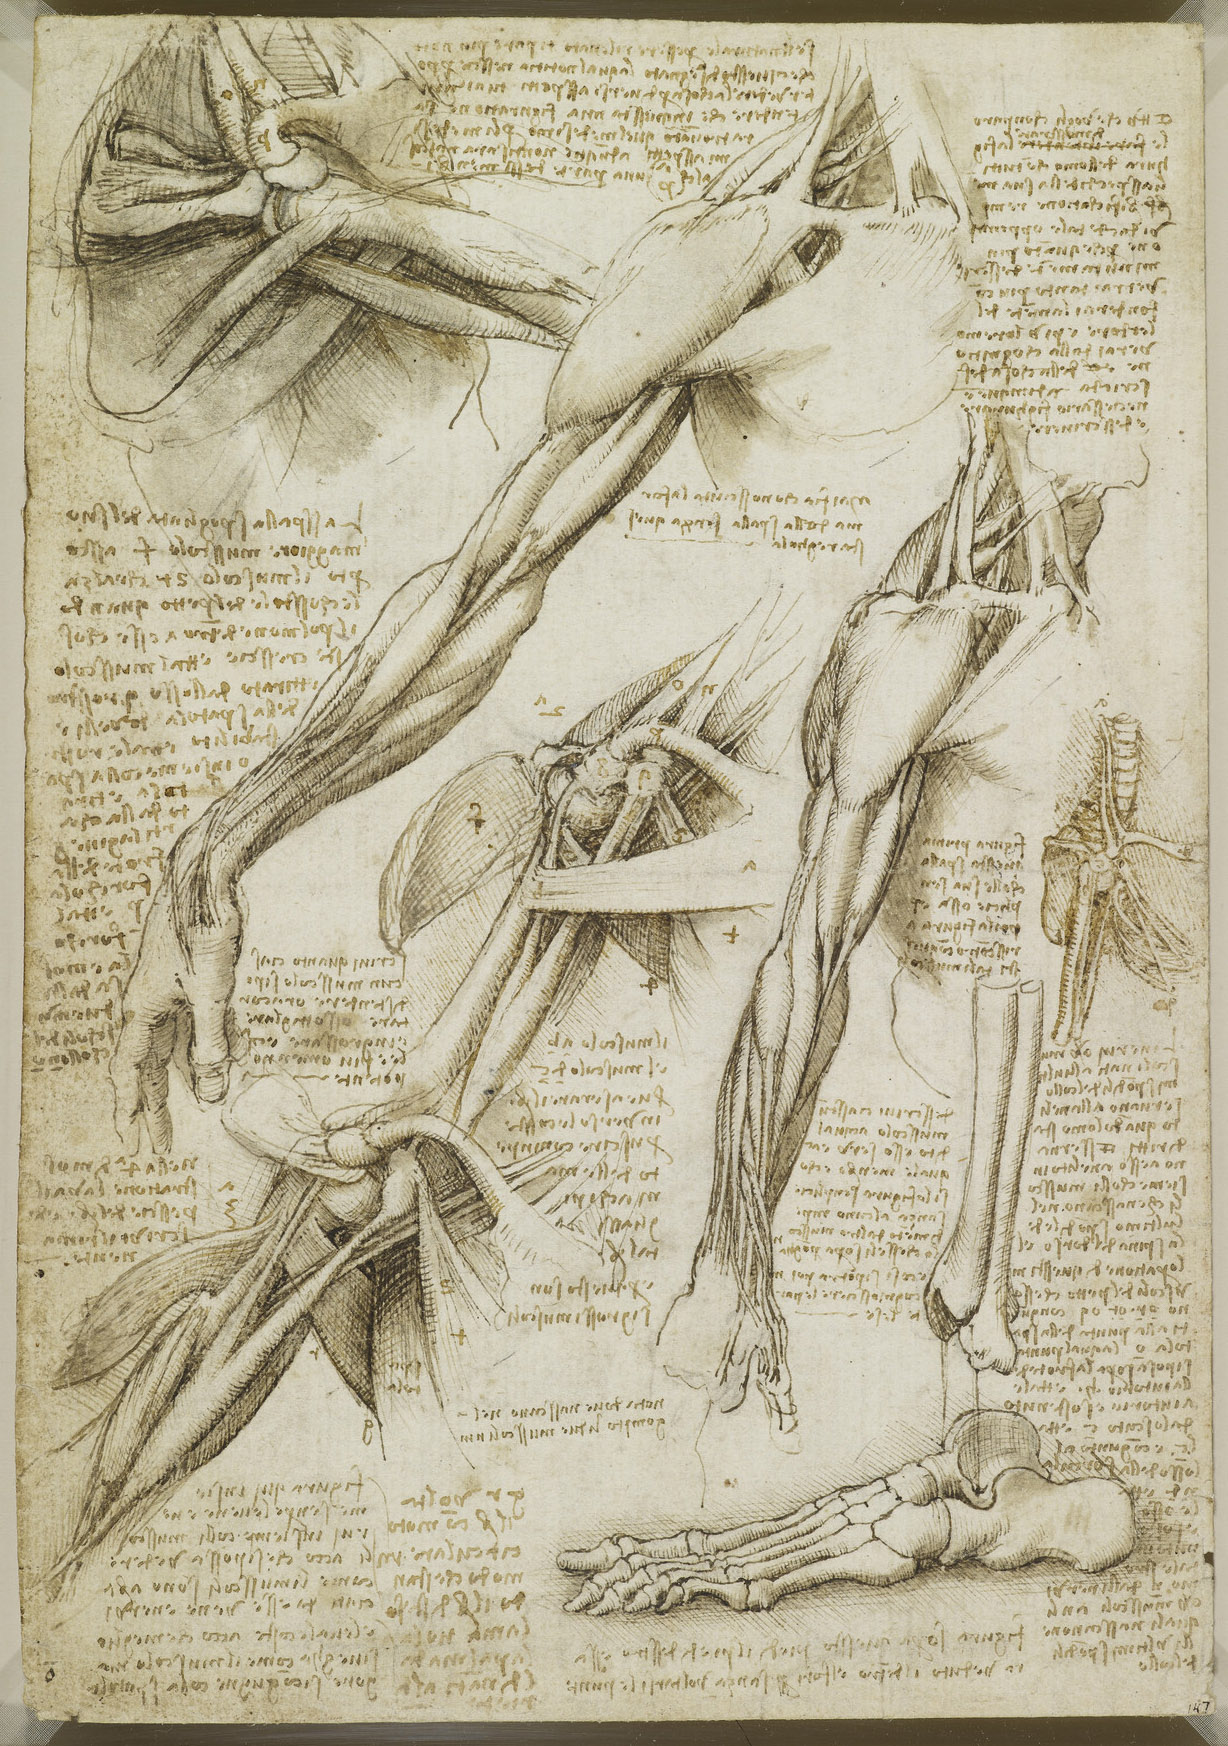 The Muscles of the Shoulder and Arm, and the Bones of the Foot.” in Pen and Ink with Wash, over traces of black chalk, 